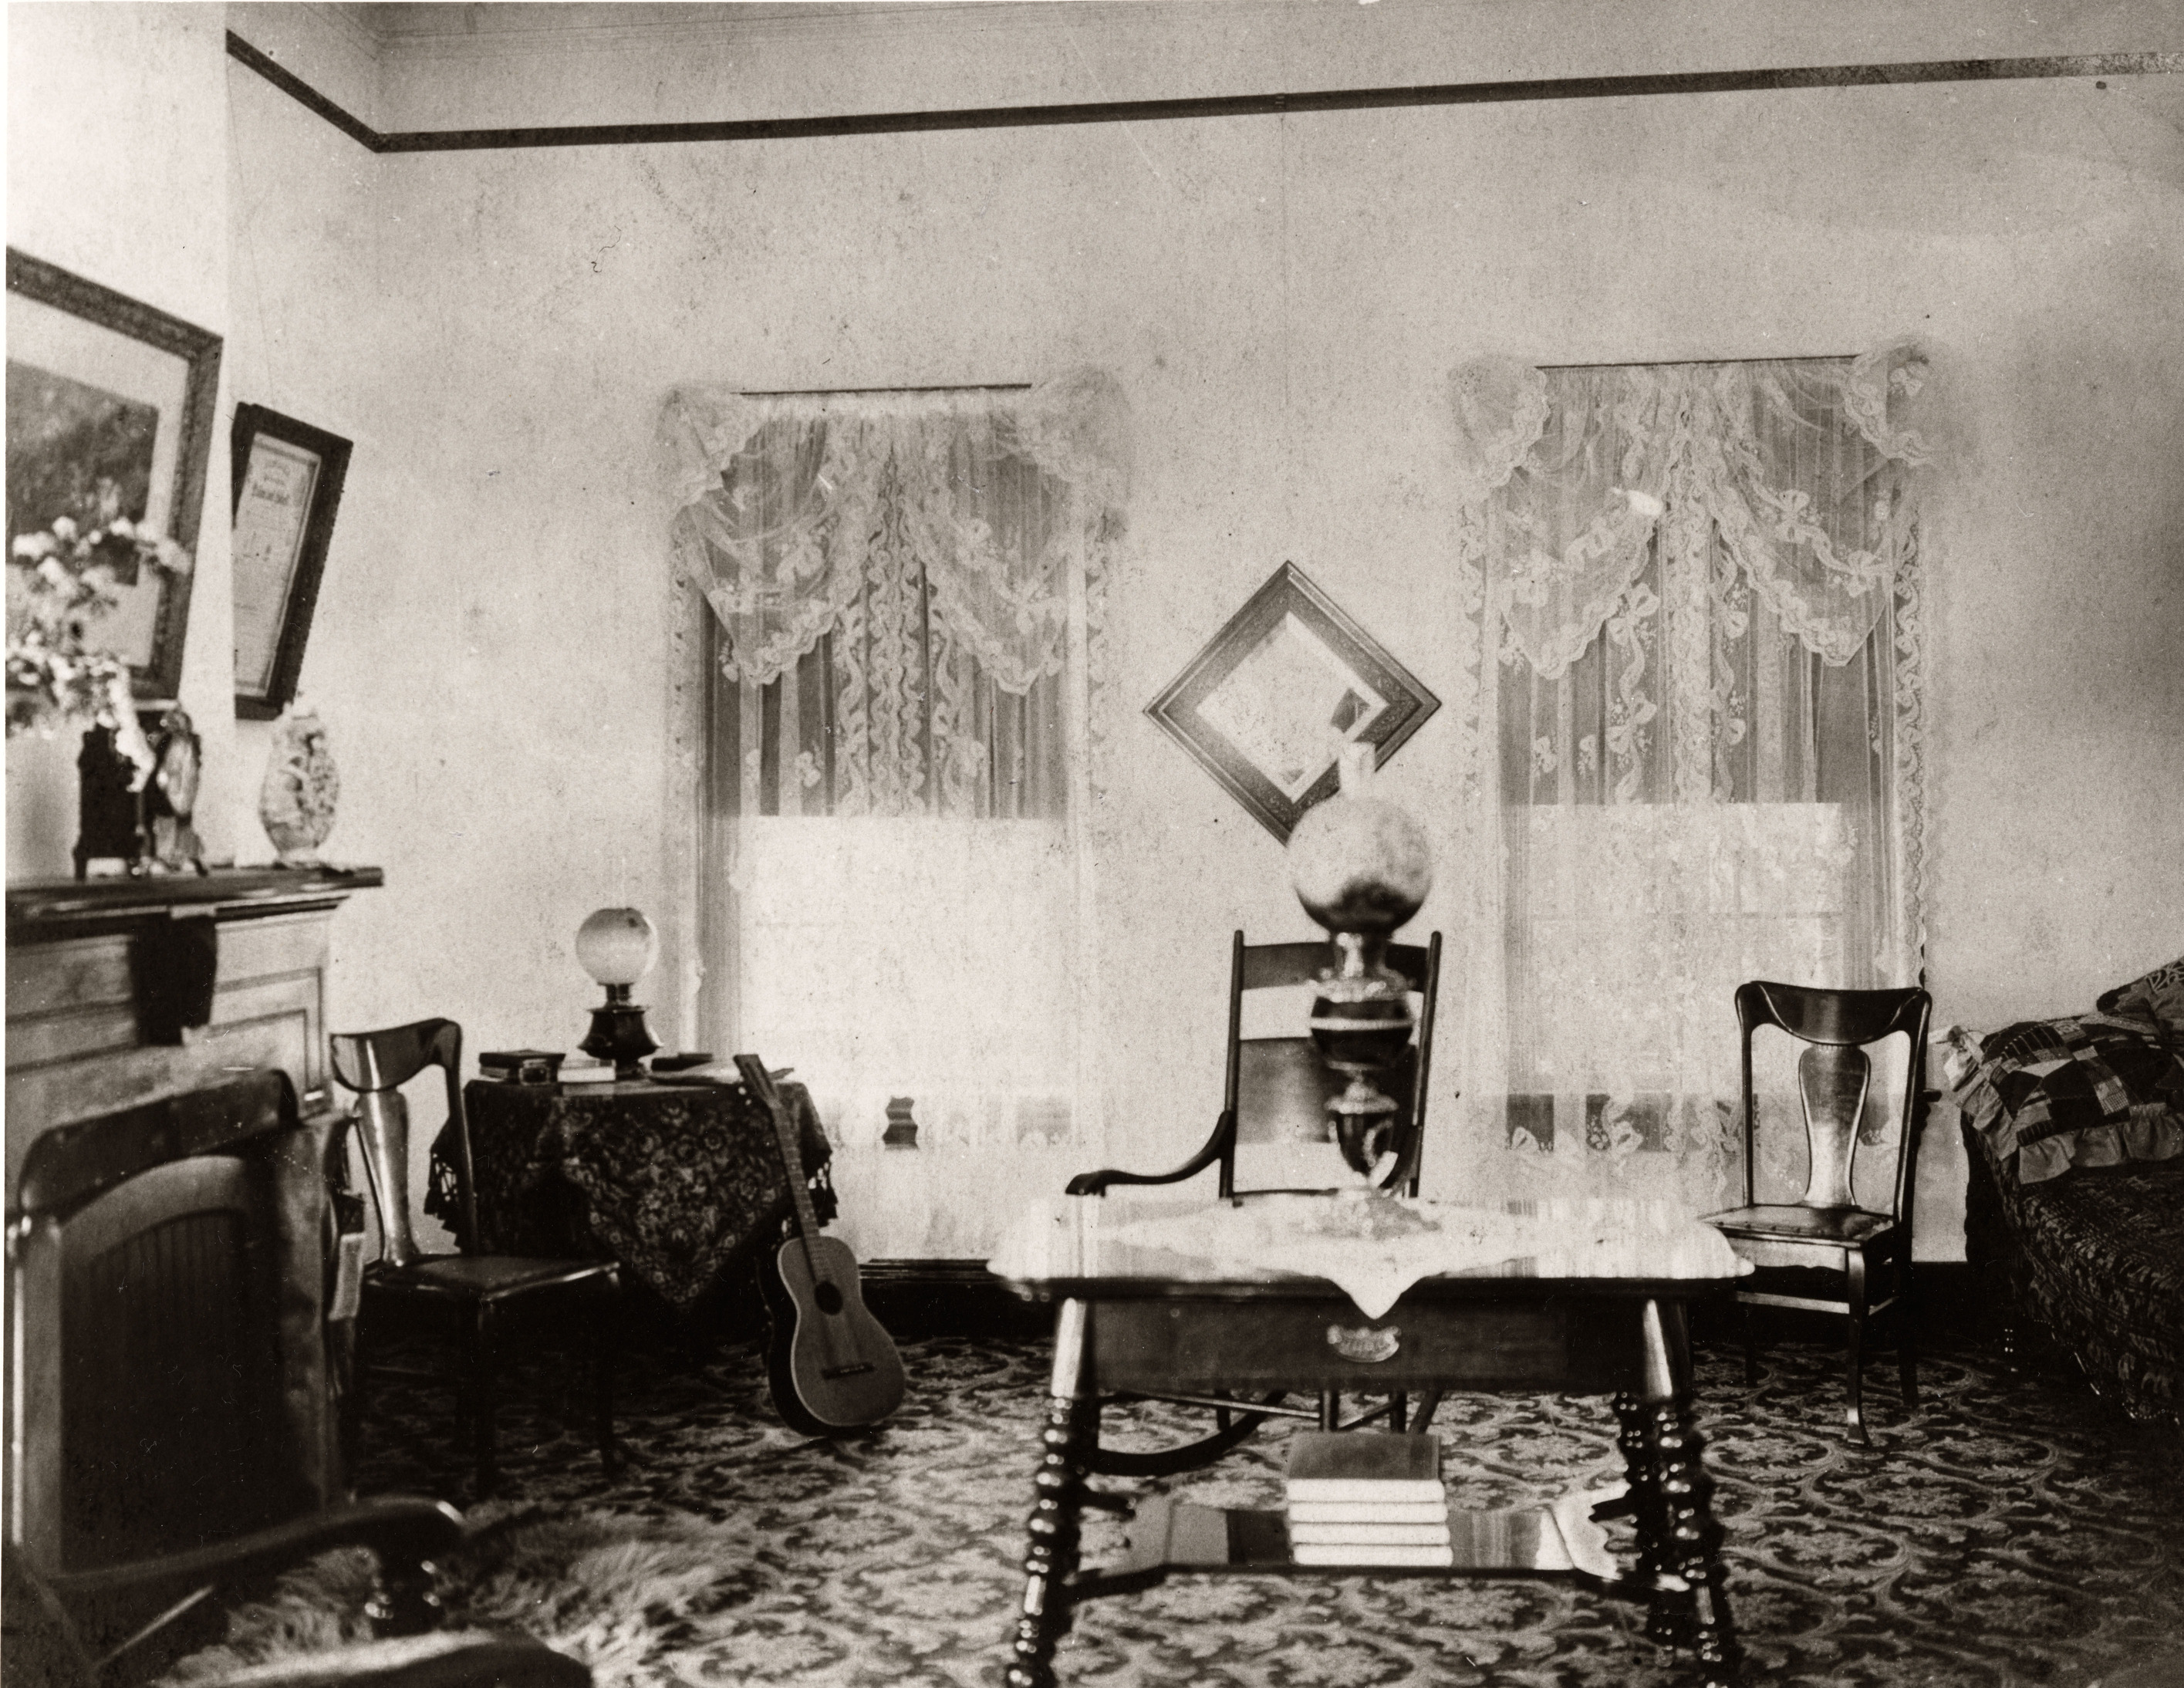 Black and white photograph of a sitting room with chairs, table, and fireplace